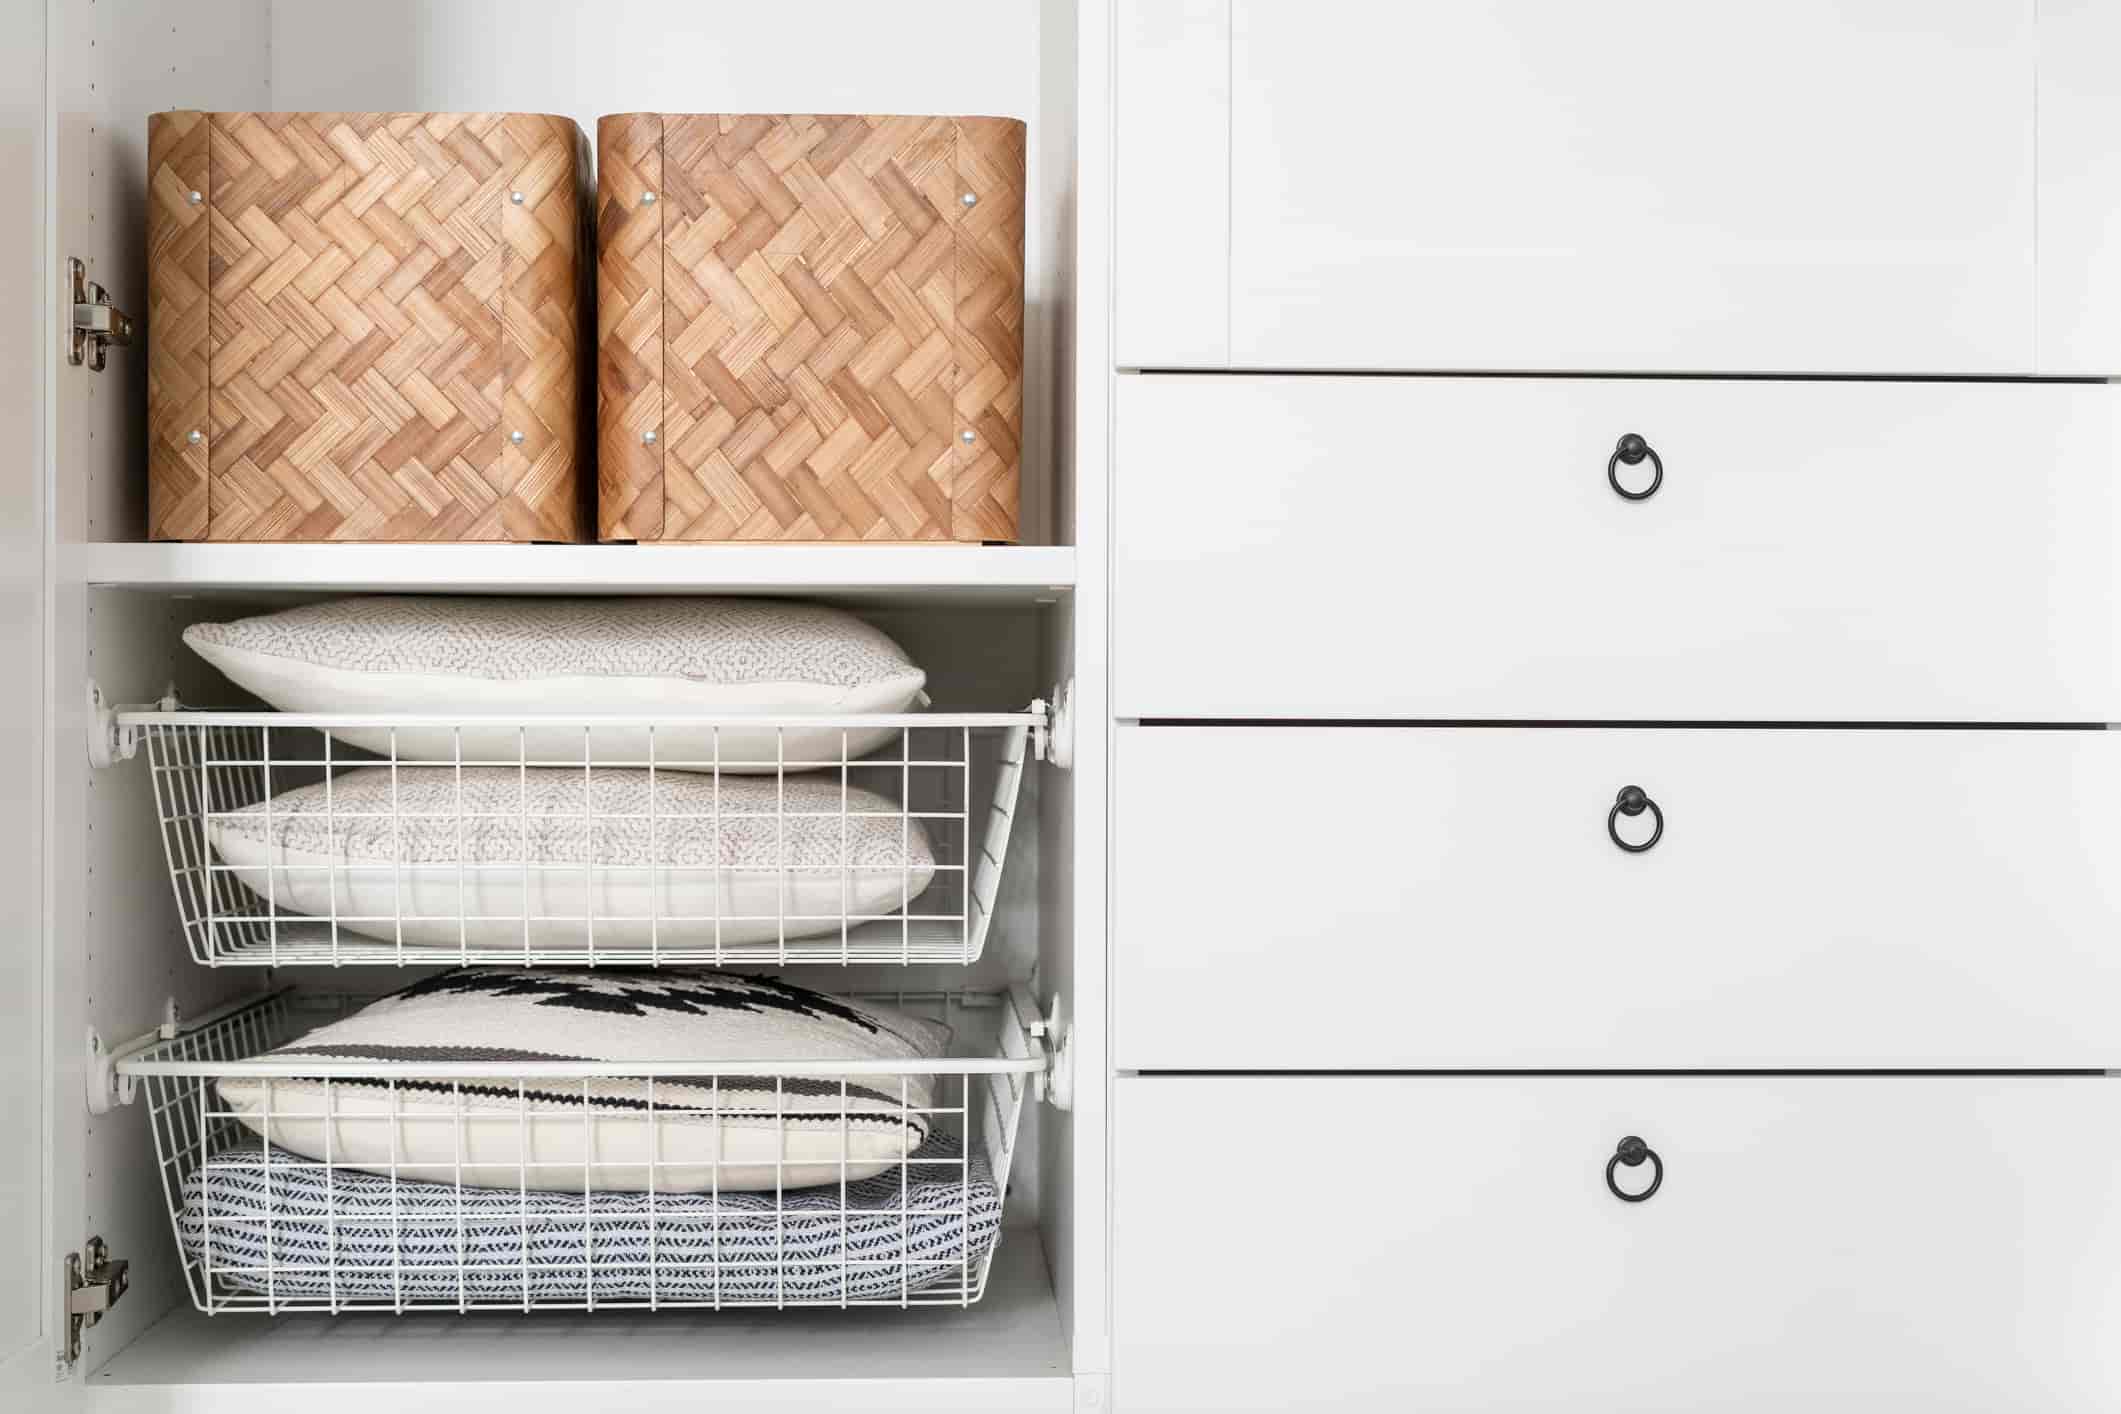 Shelving unit with baskets, pillows, and drawers.